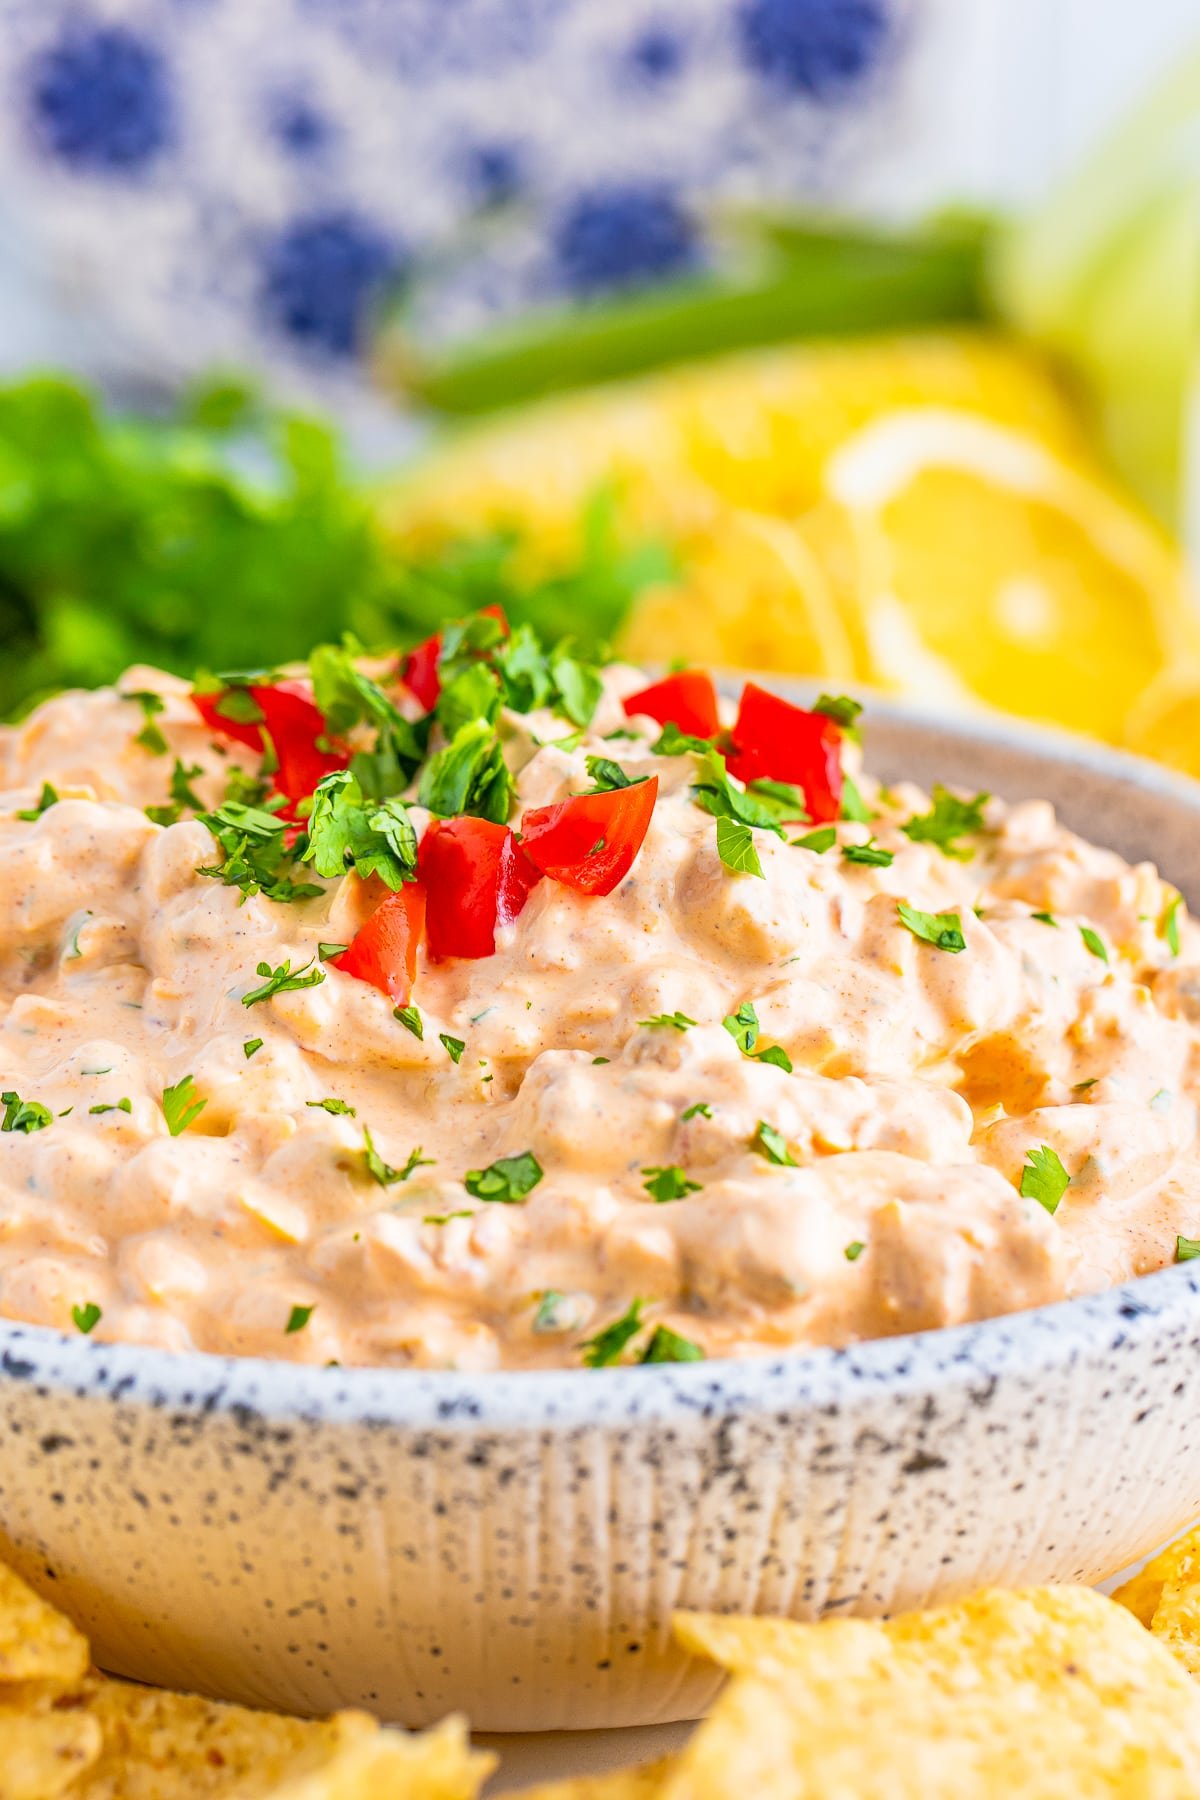 up close image of Cream Cheese Taco Dip served in a bowl with garnishes